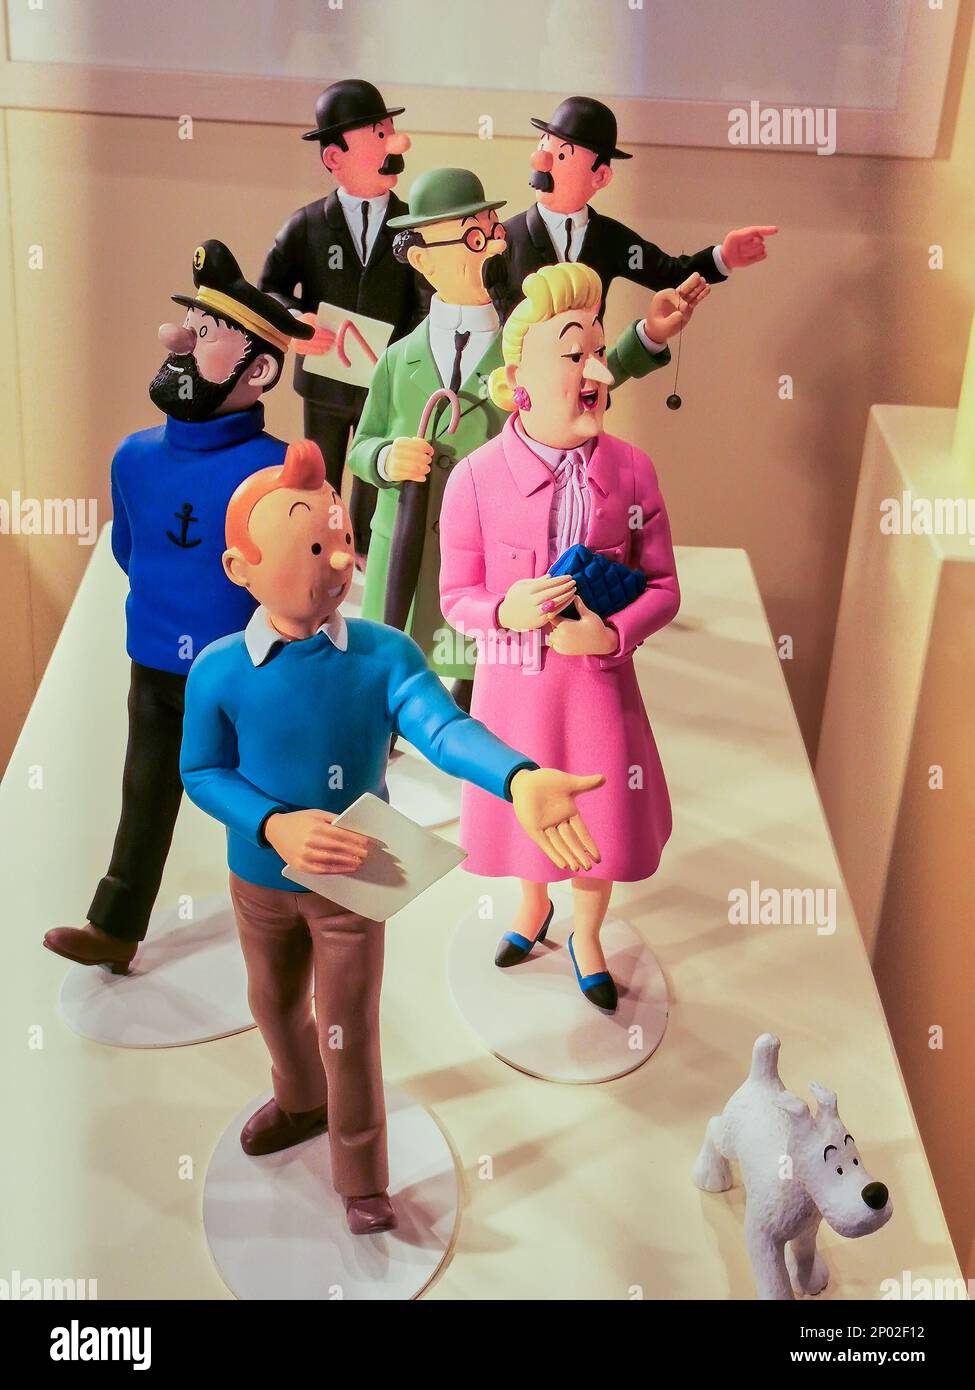 Figurines of the wonderful characters from the Adventures of Tintin comic book series Stock Photo